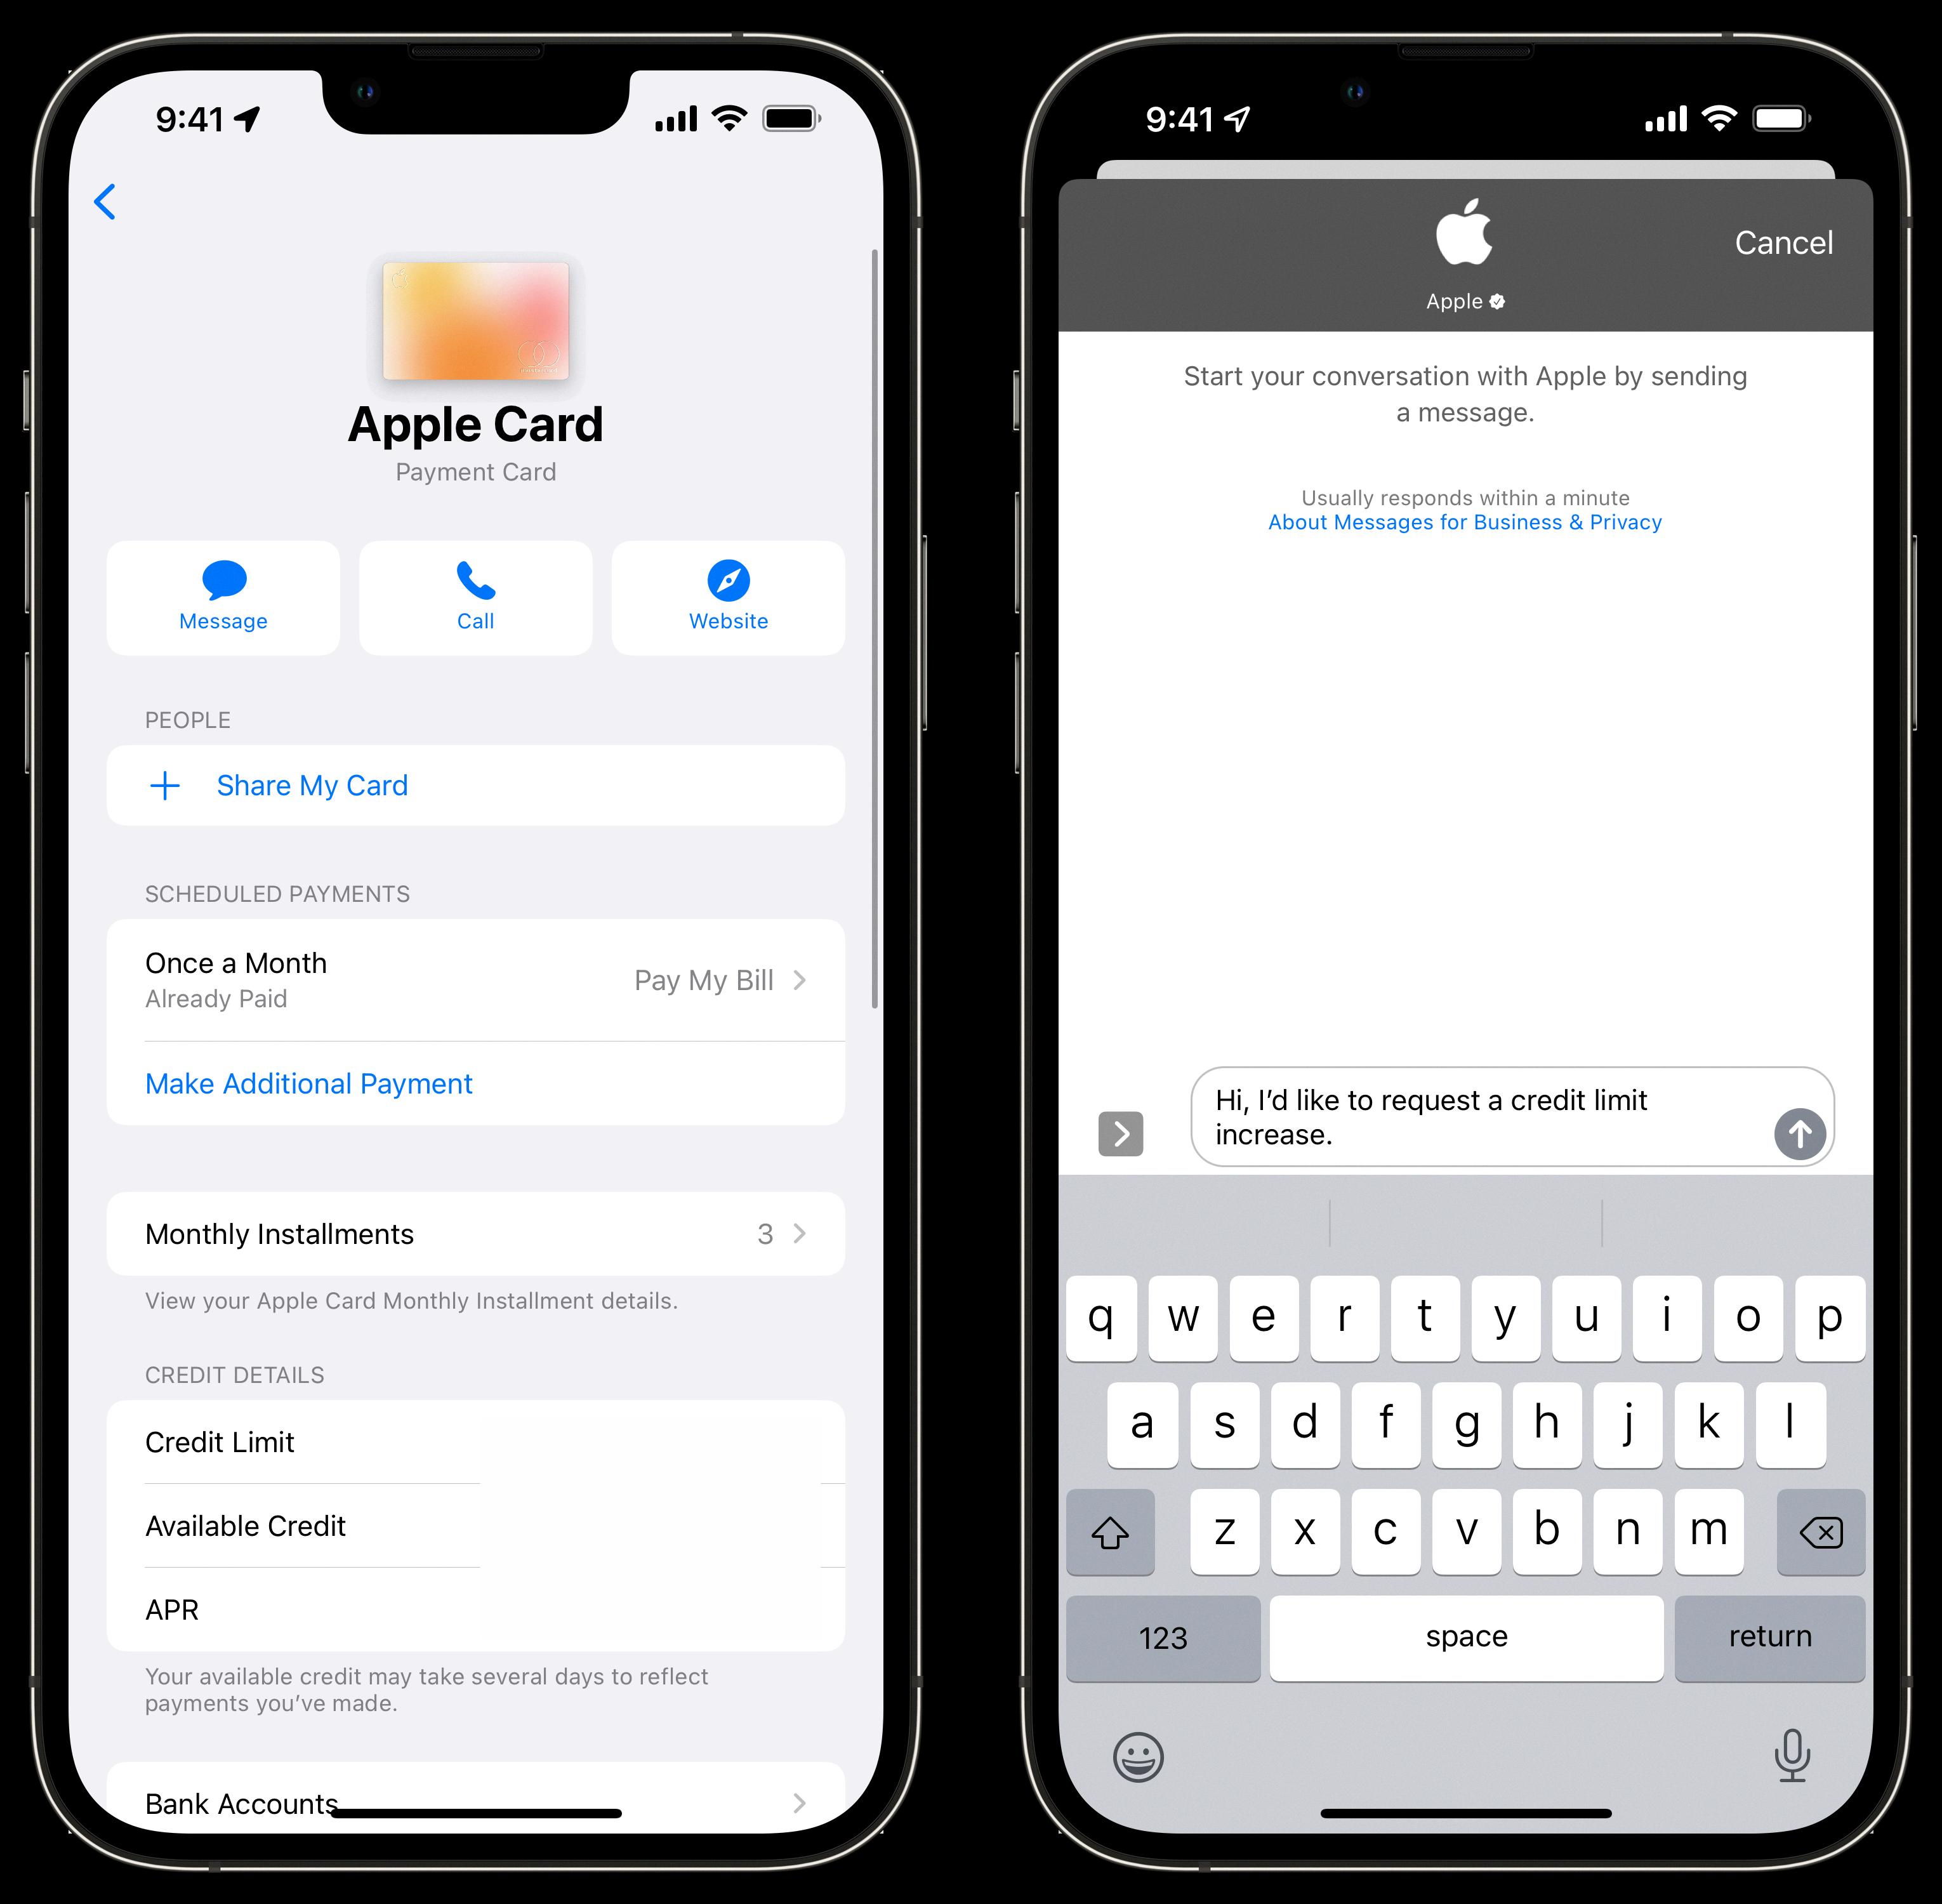 How to Increase Your Apple Card Credit Limit? 13